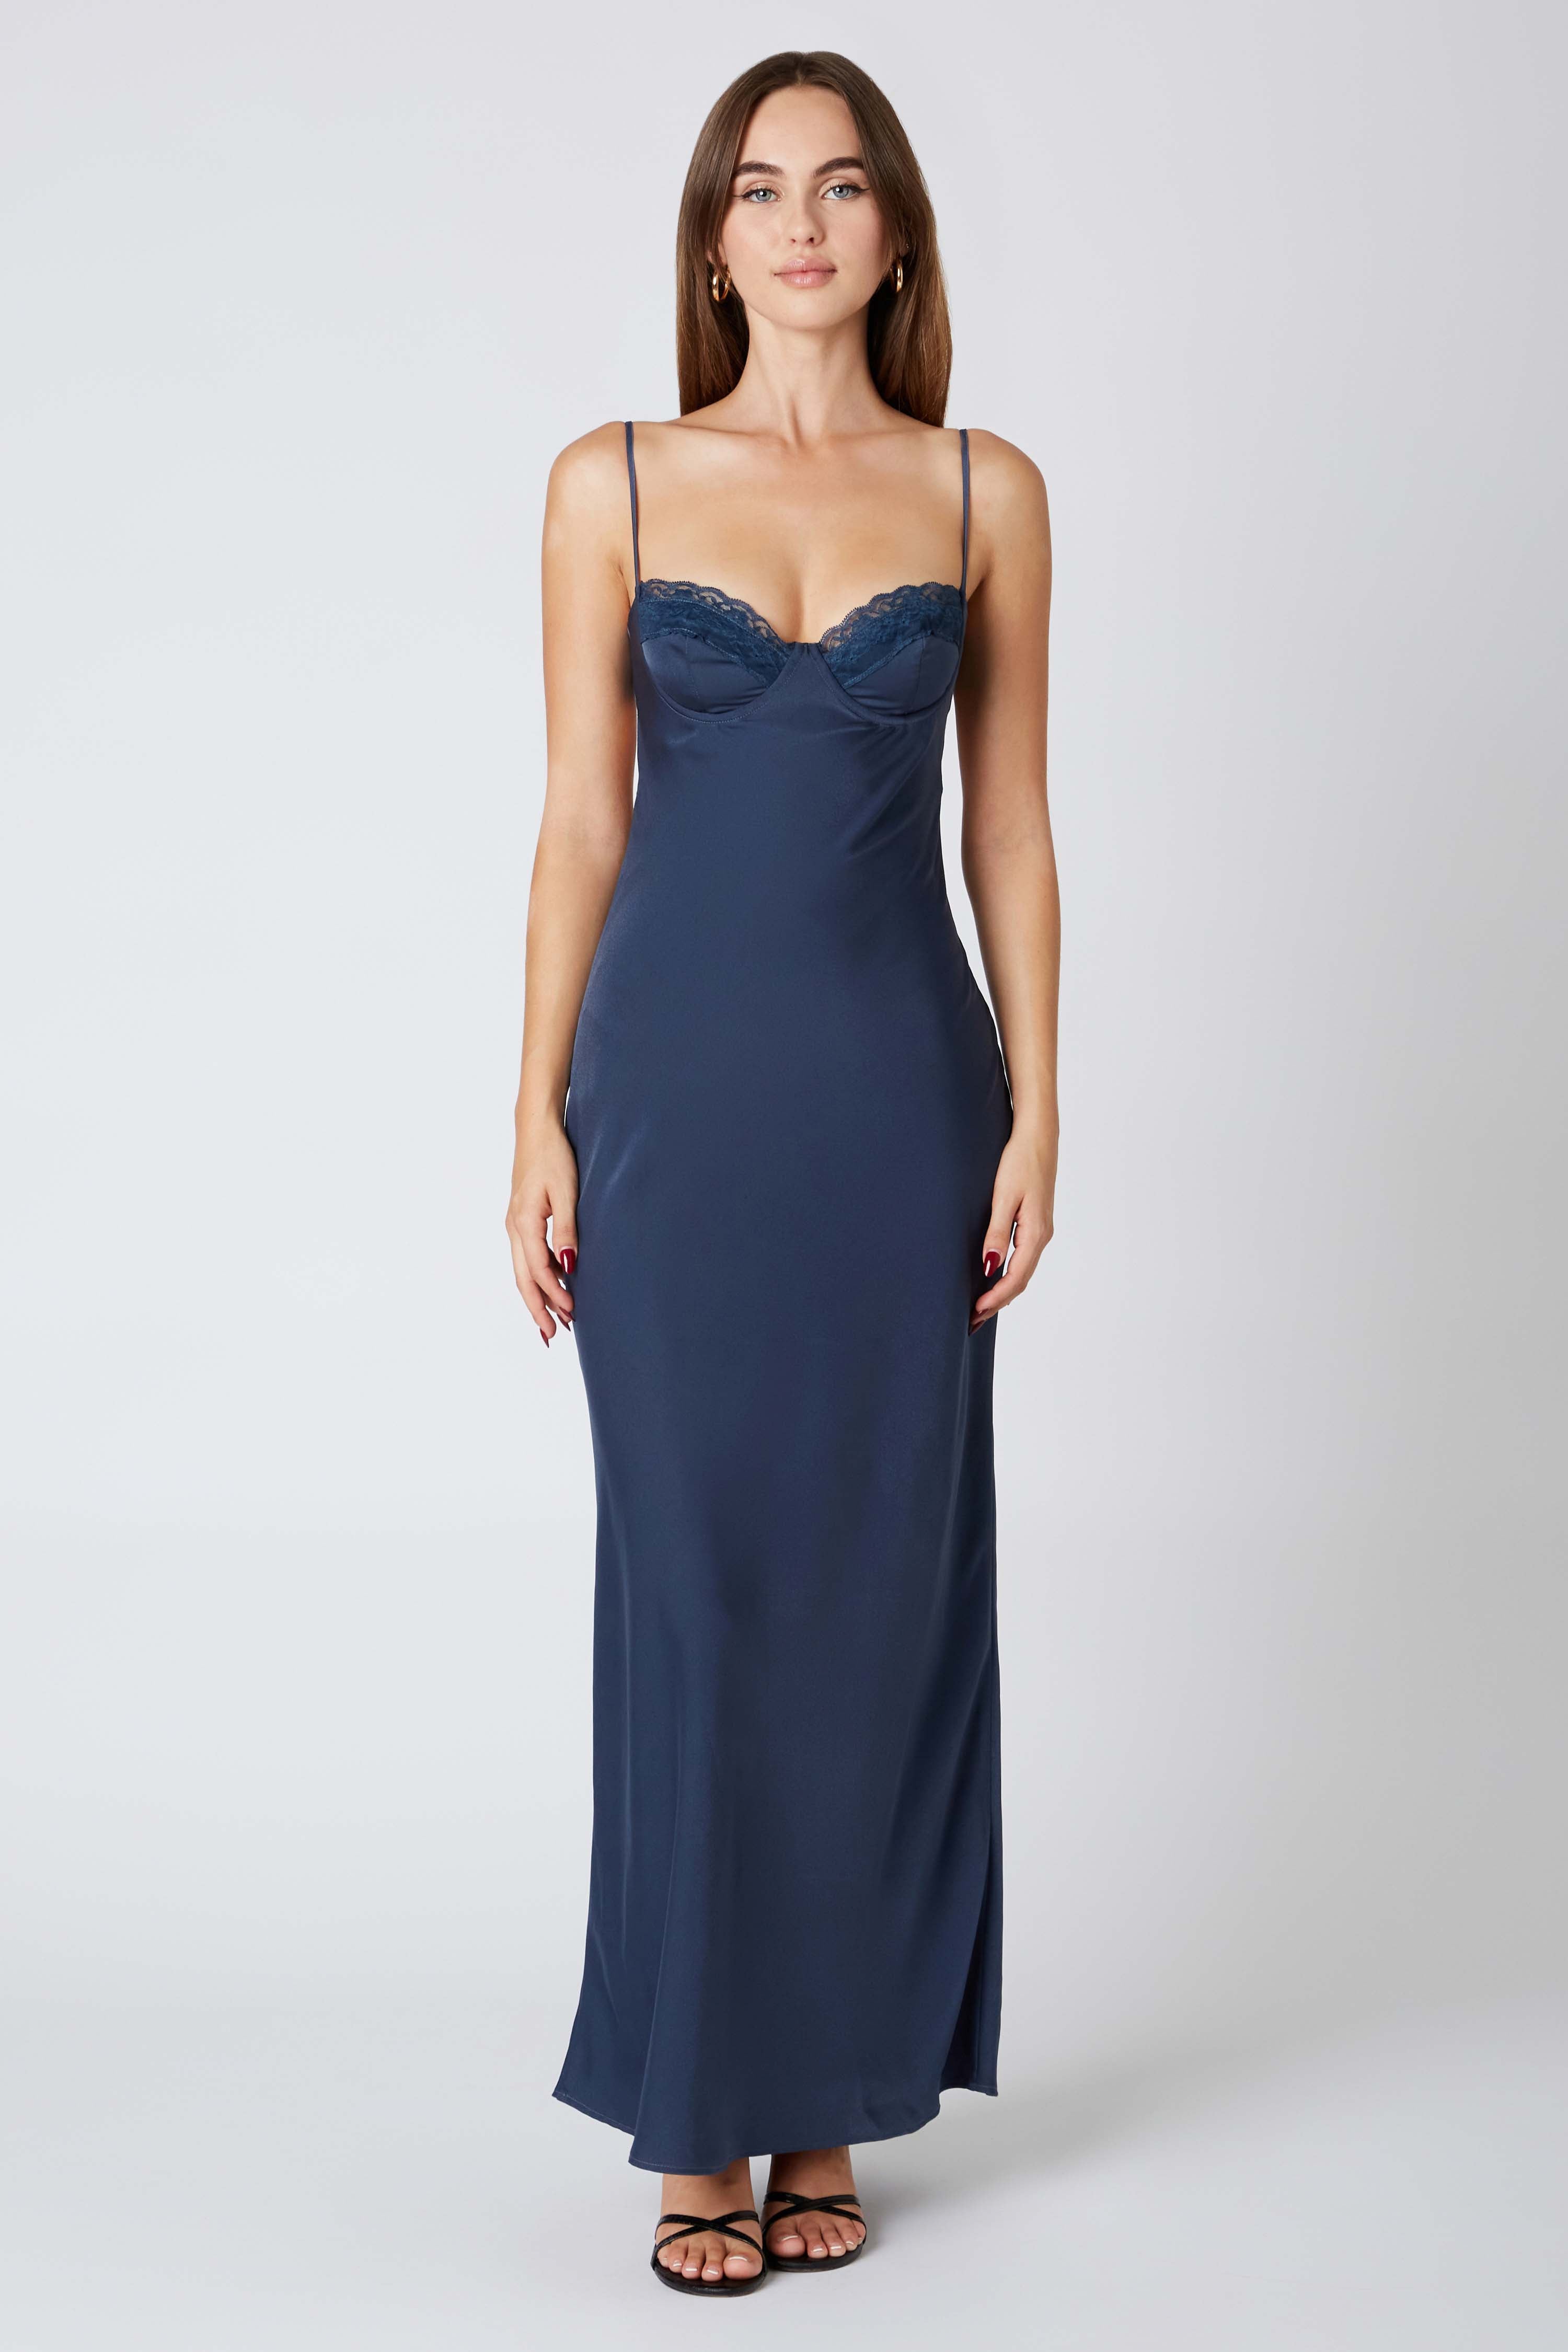 Corset Maxi Dress in Dusk Front View